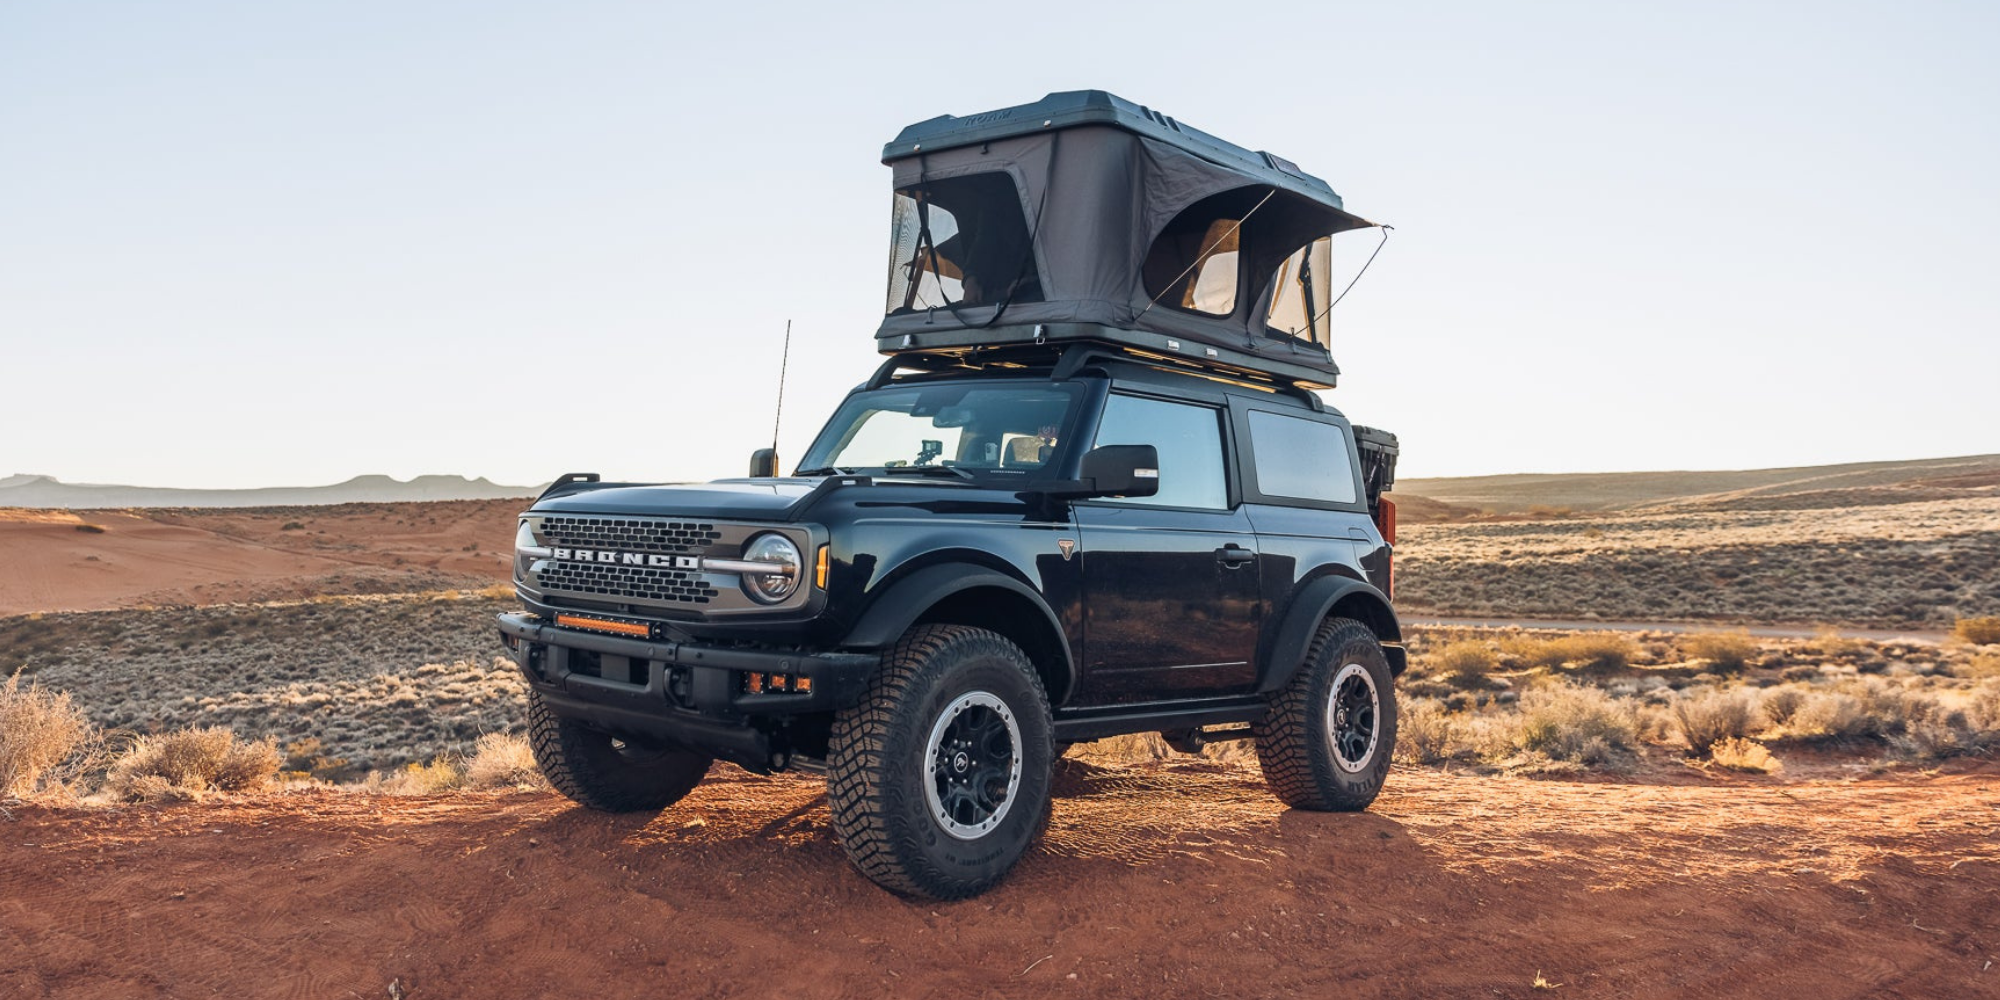 The Best Ford Bronco Roof Top Tent - ROAM Adventure Co.